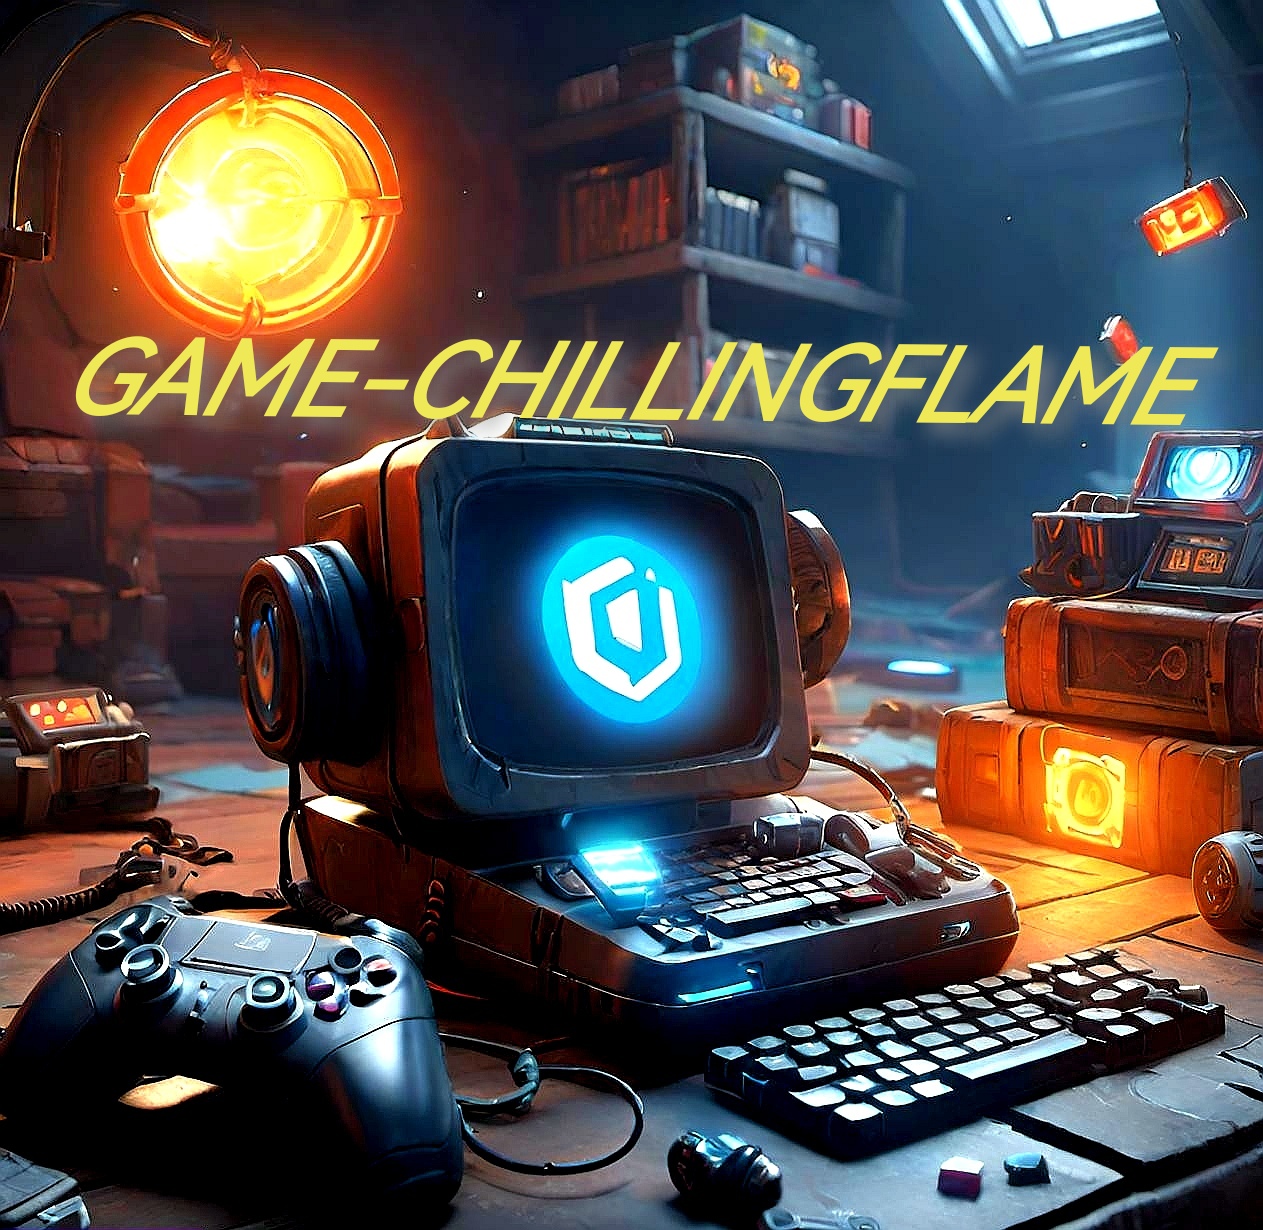 Telegram - channel about games, humor and news